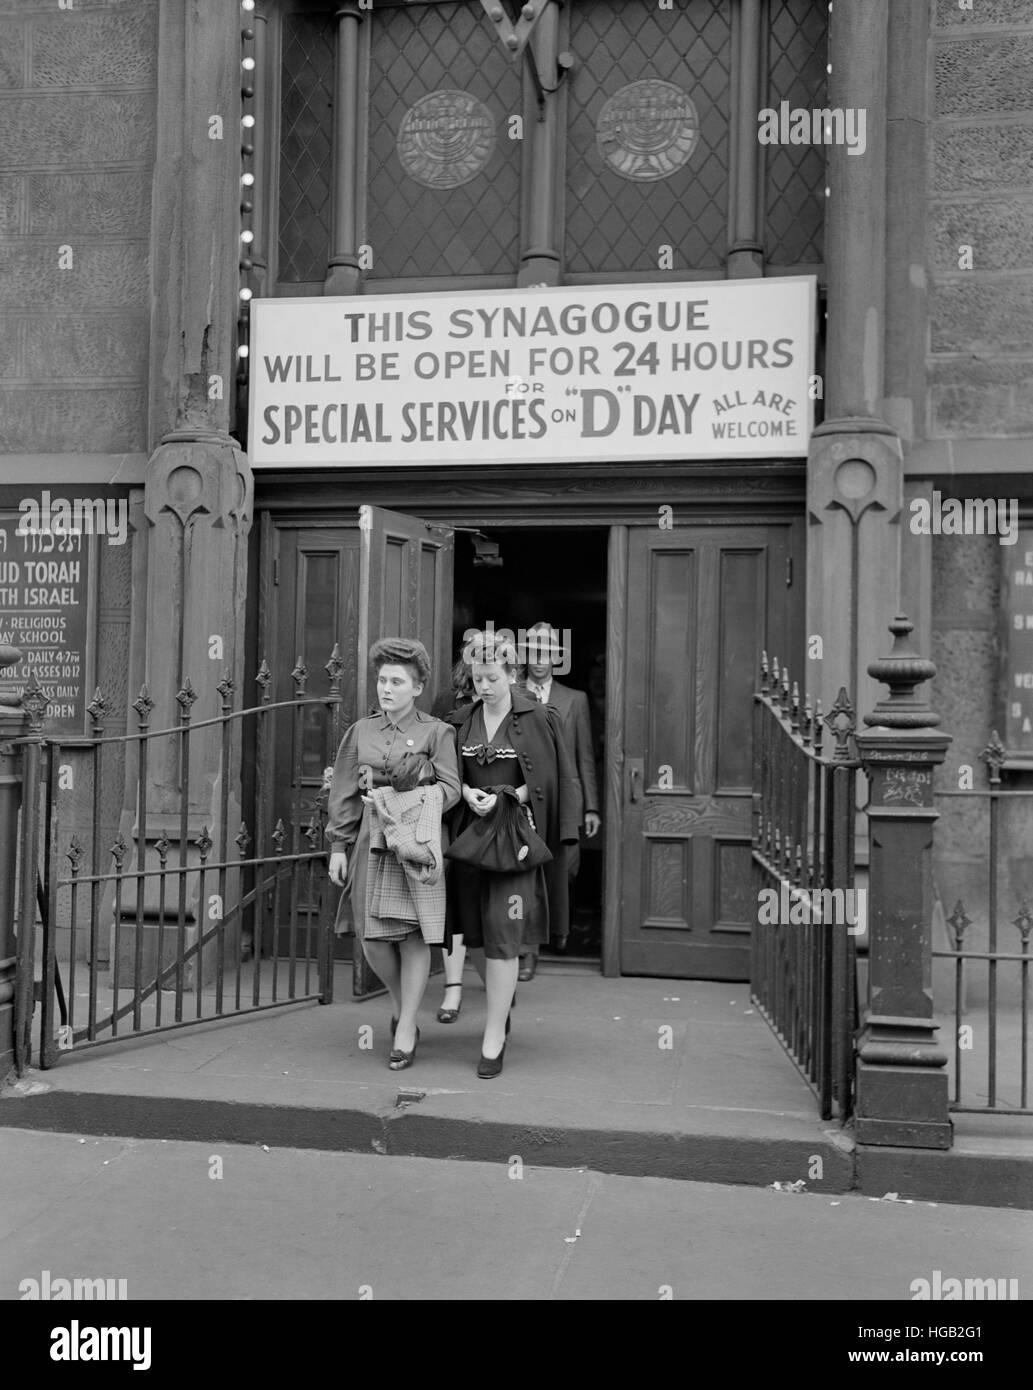 D-Day sevices in a synagogue in New York, New York, 1944. Stock Photo